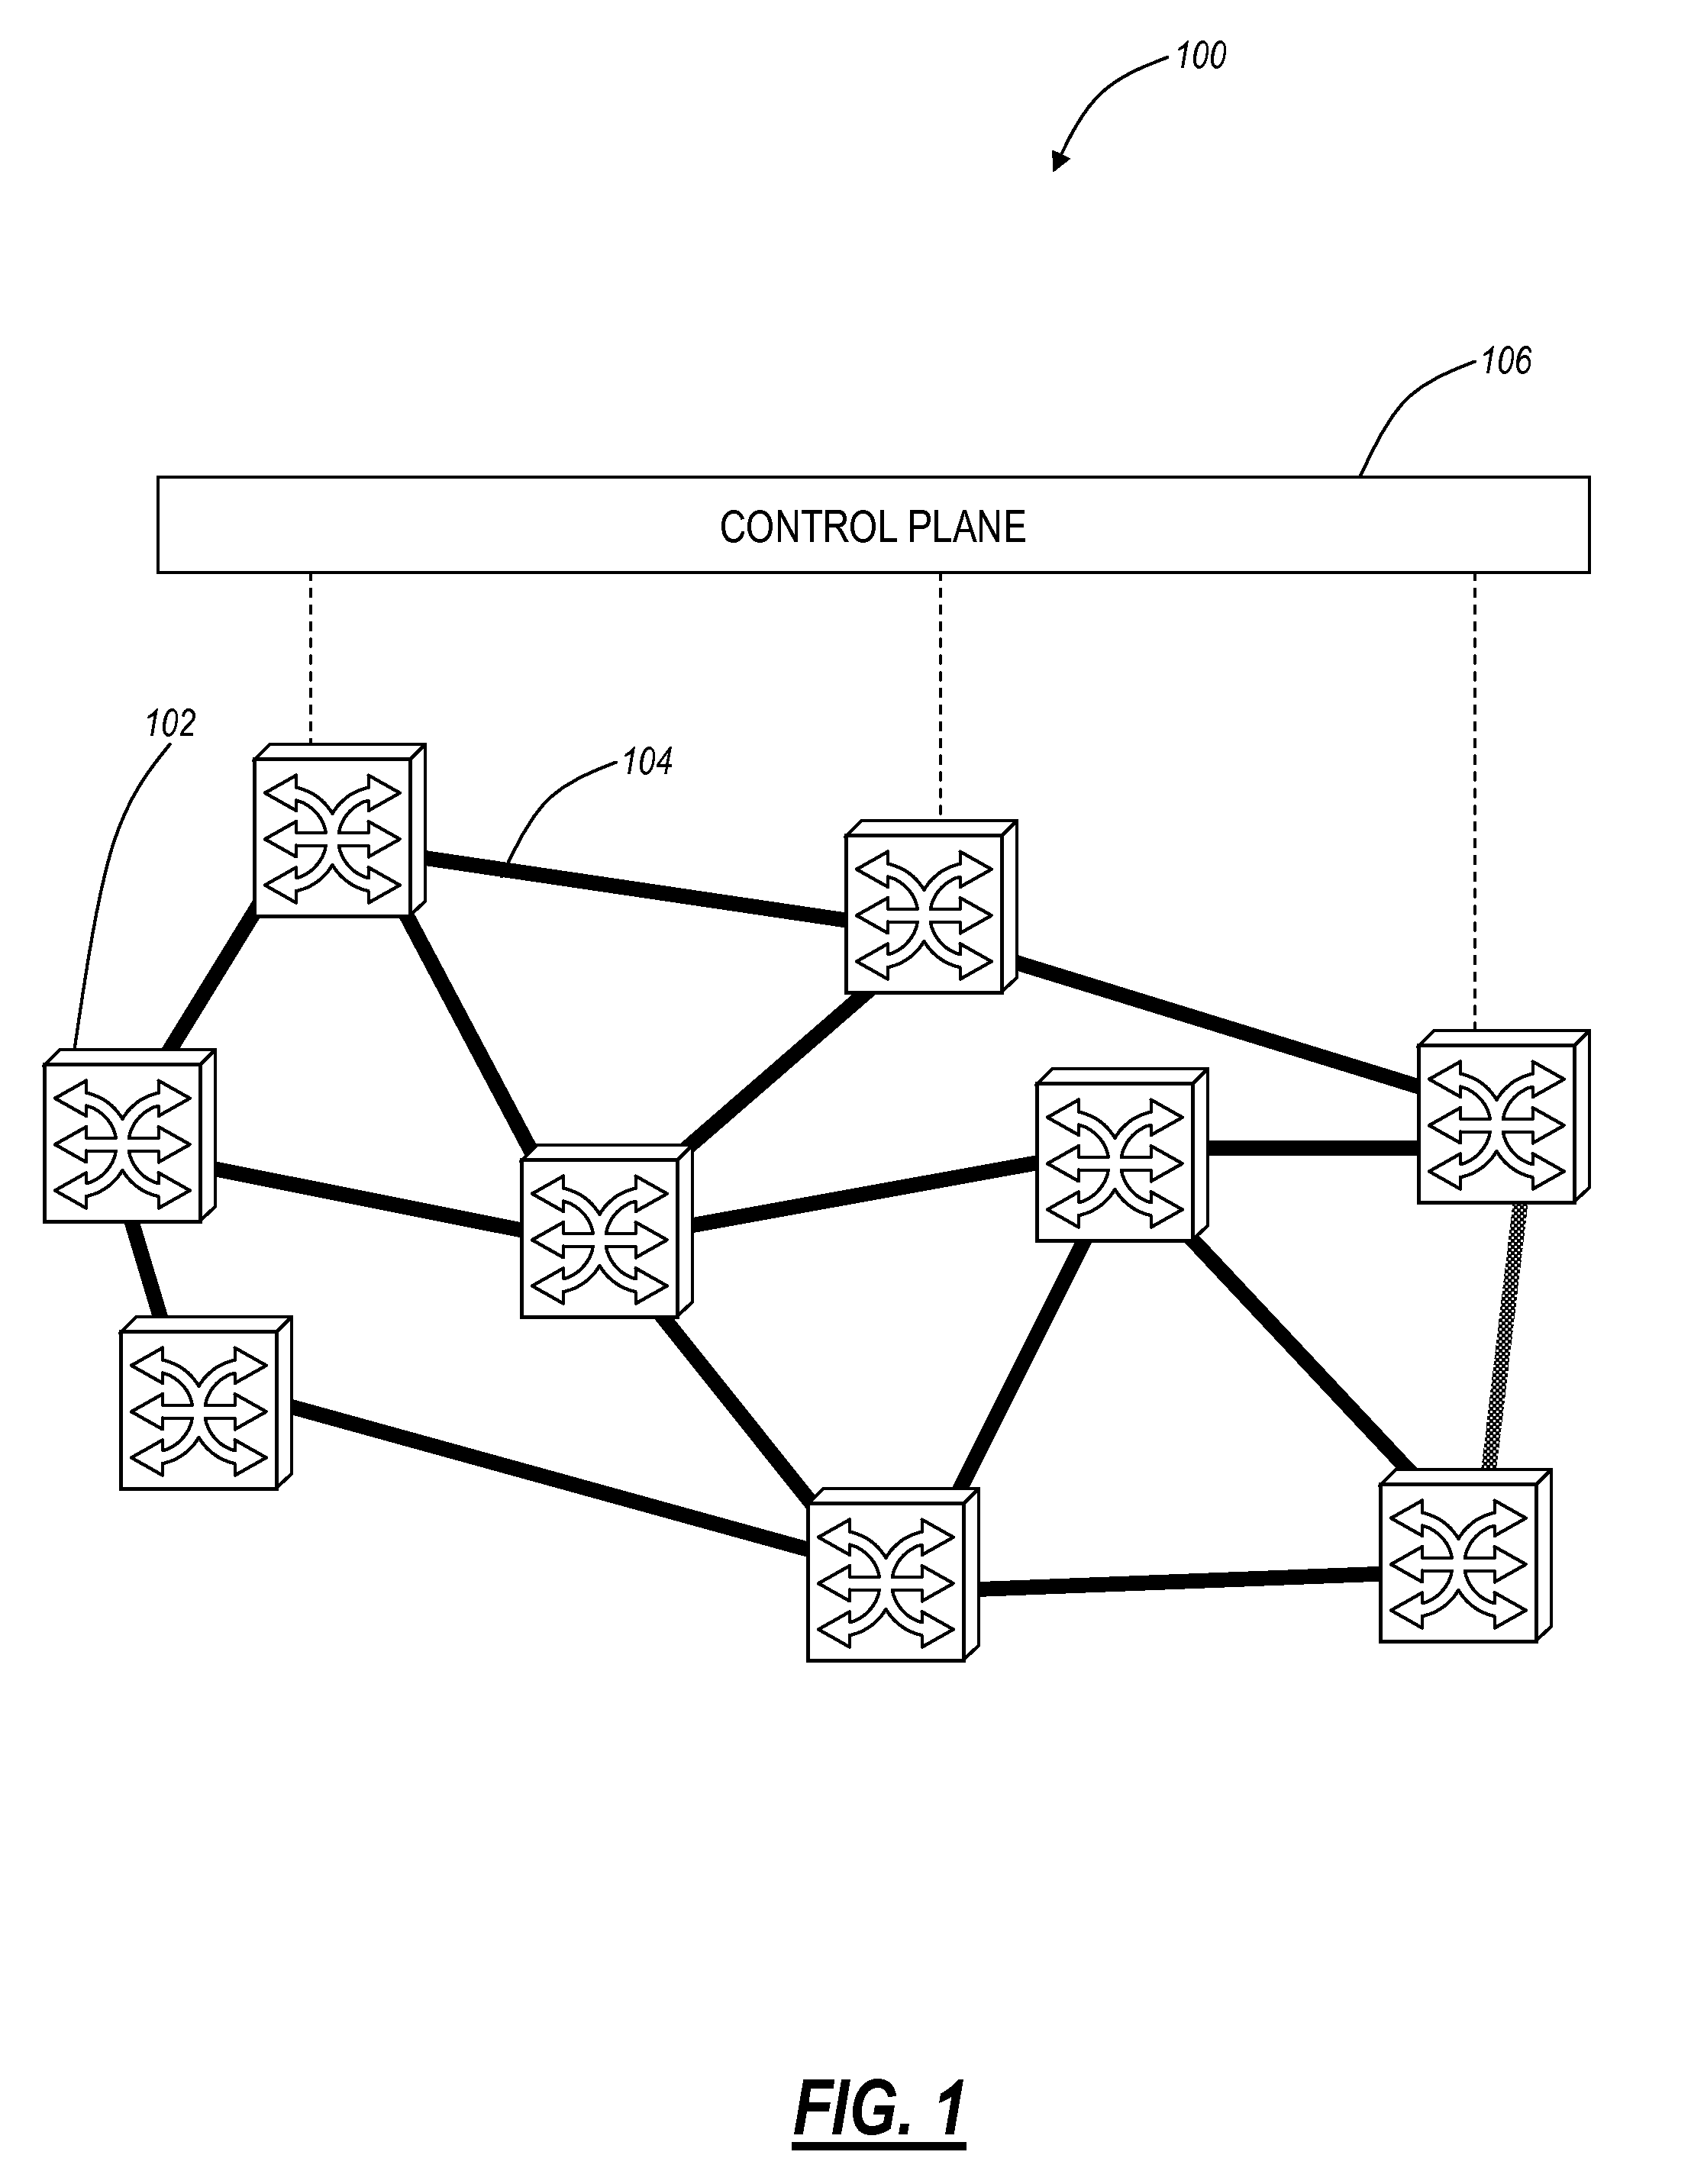 Dynamic performance monitoring systems and methods for optical networks